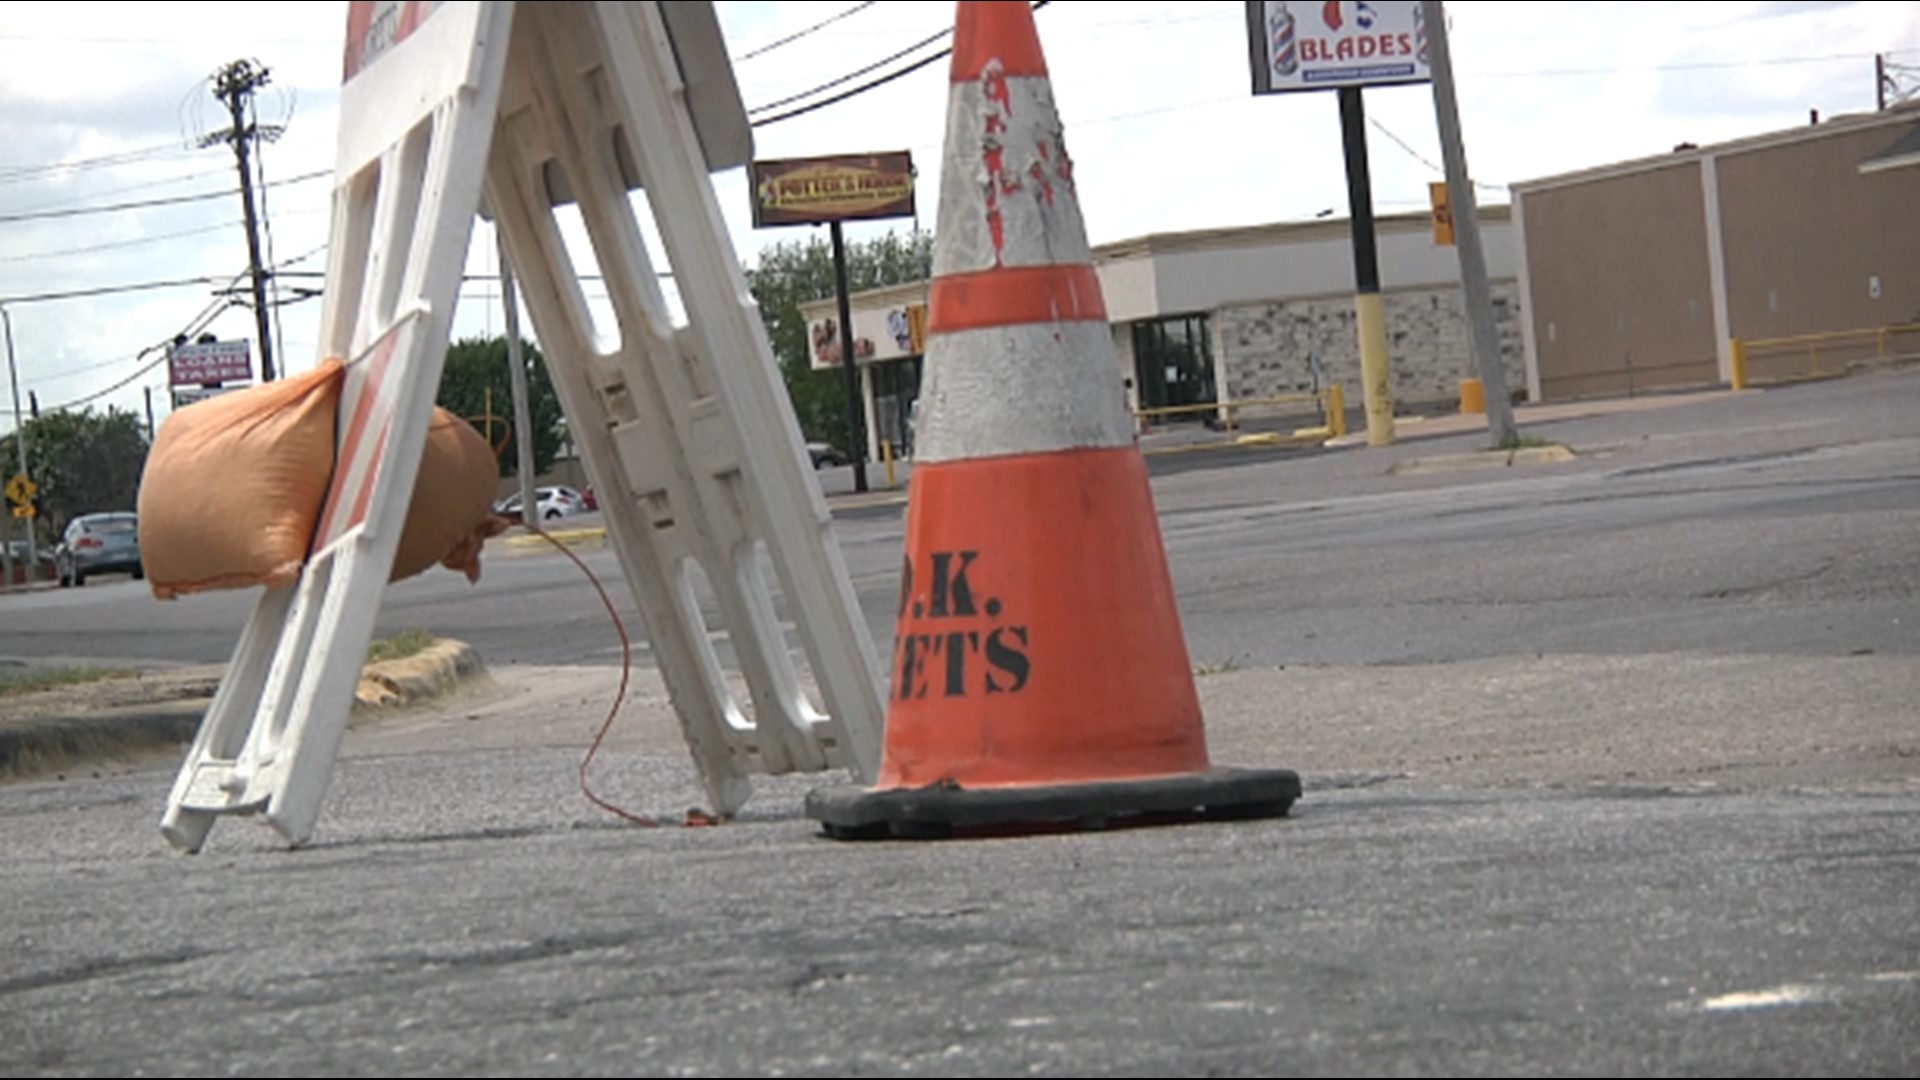 The City of Killeen will start to include a street fee in utility bills this month to gather funds for road repairs throughout the area. The city said the fee, which it approved on Dec. 11, 2018, will collect around $1.6 million each year specifically for street maintenance.